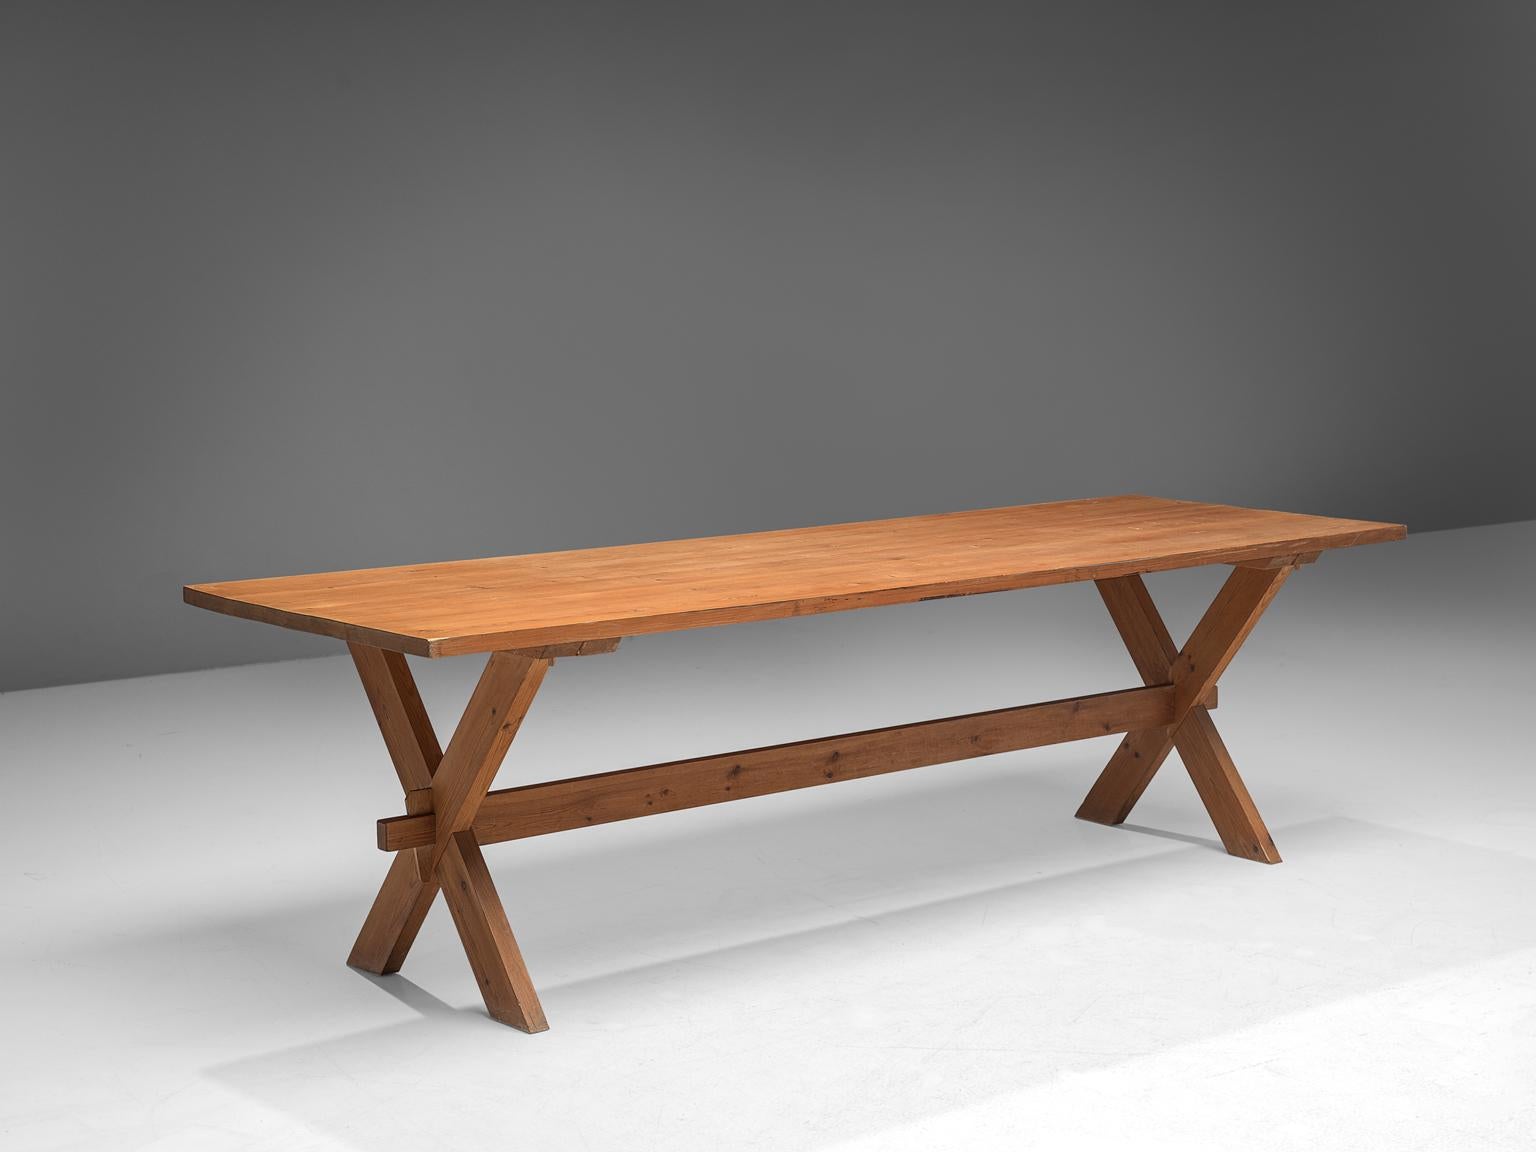 Dining table, solid pine, Scandinavia, 1960s.

This large dining table is made of solid pine in the 1960s. The table features X-legs which gives the design an architectural, yet slender appearance. Although the table is robust, it still carries out